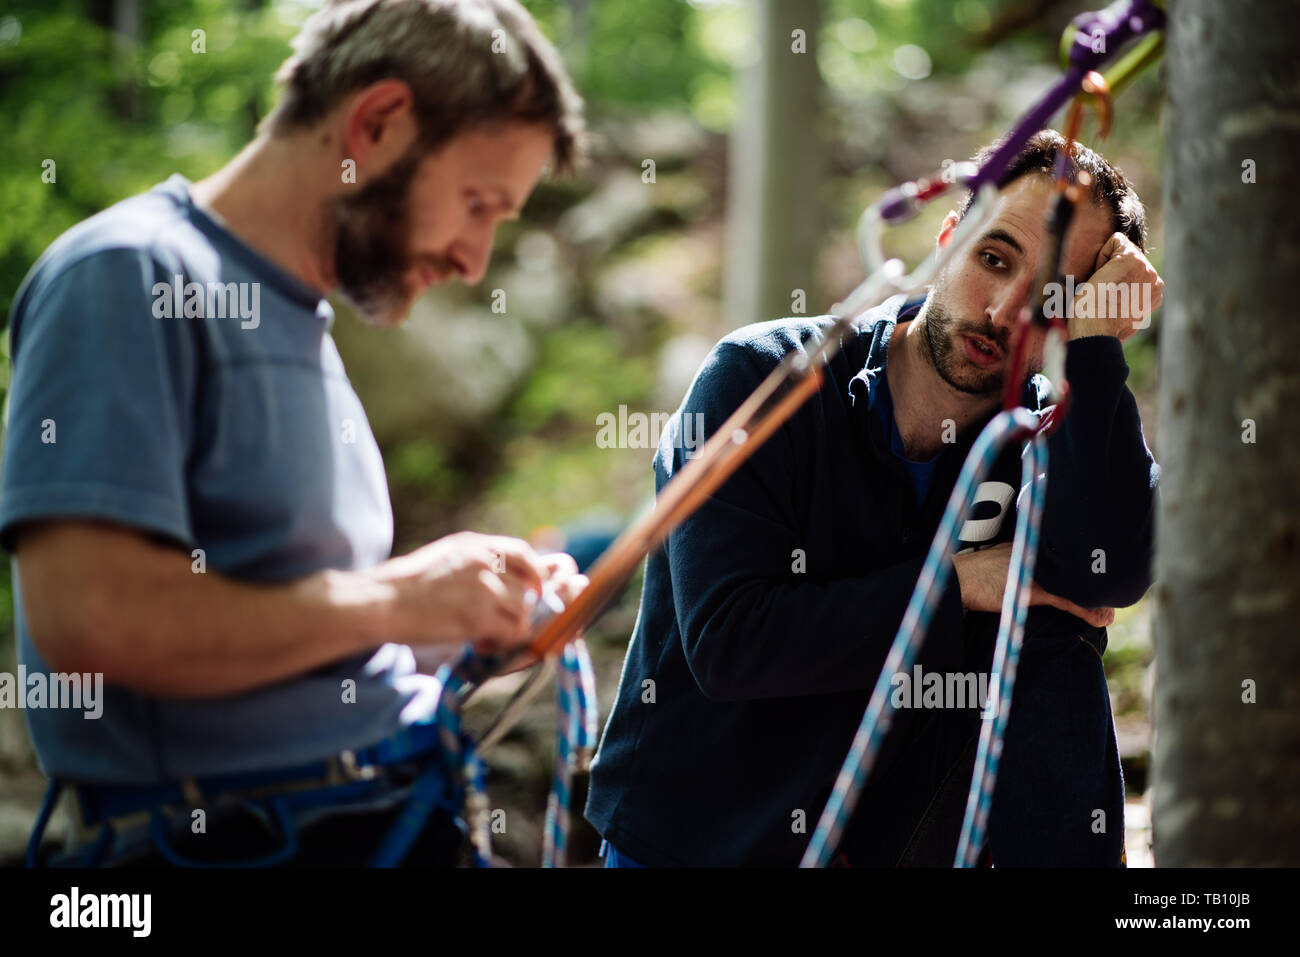 Two men practicing climbing techniques with rope Stock Photo